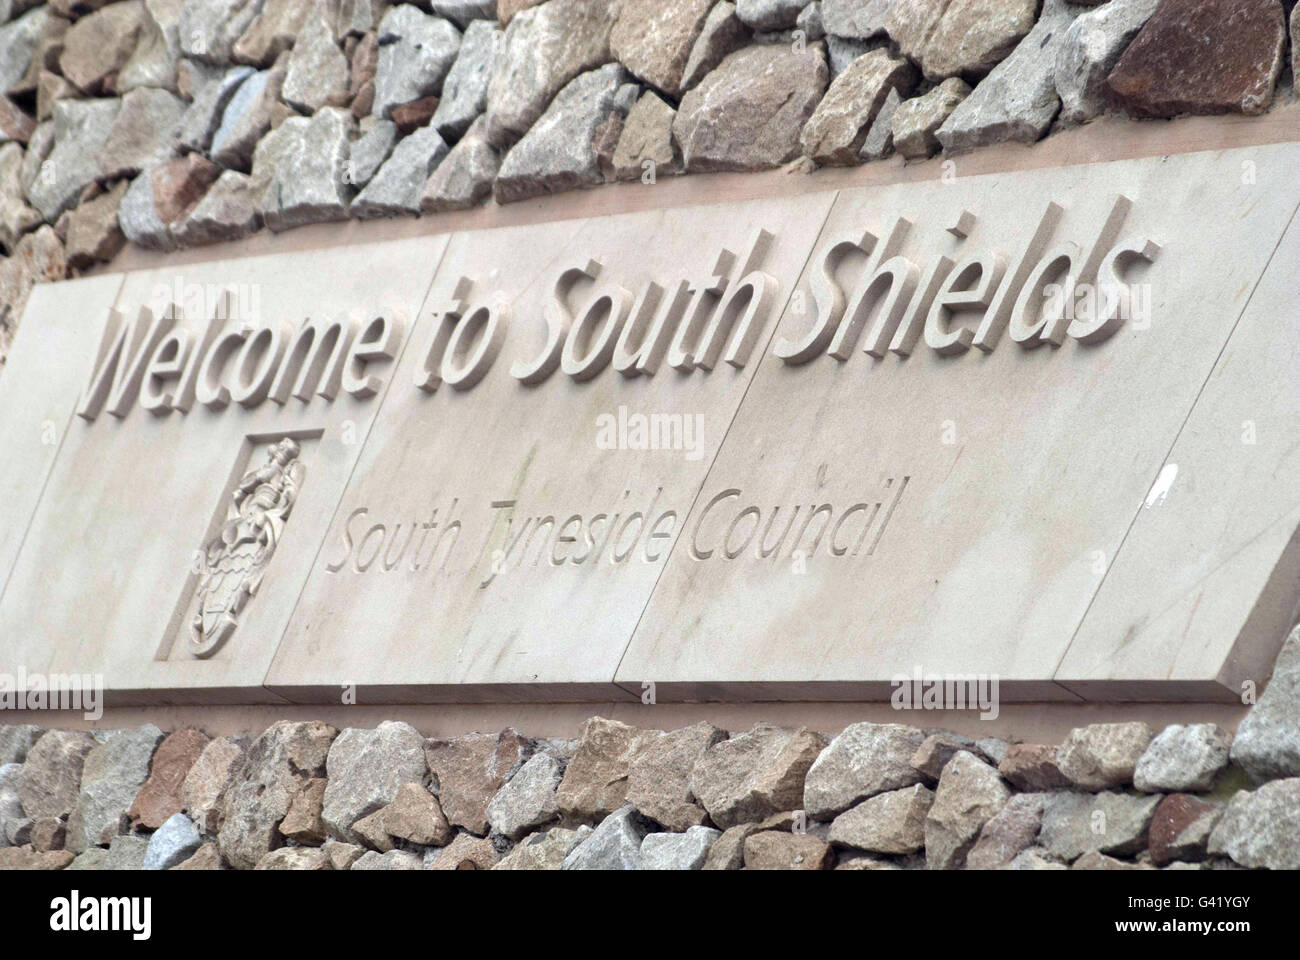 Welcome to South Shields Stock Photo